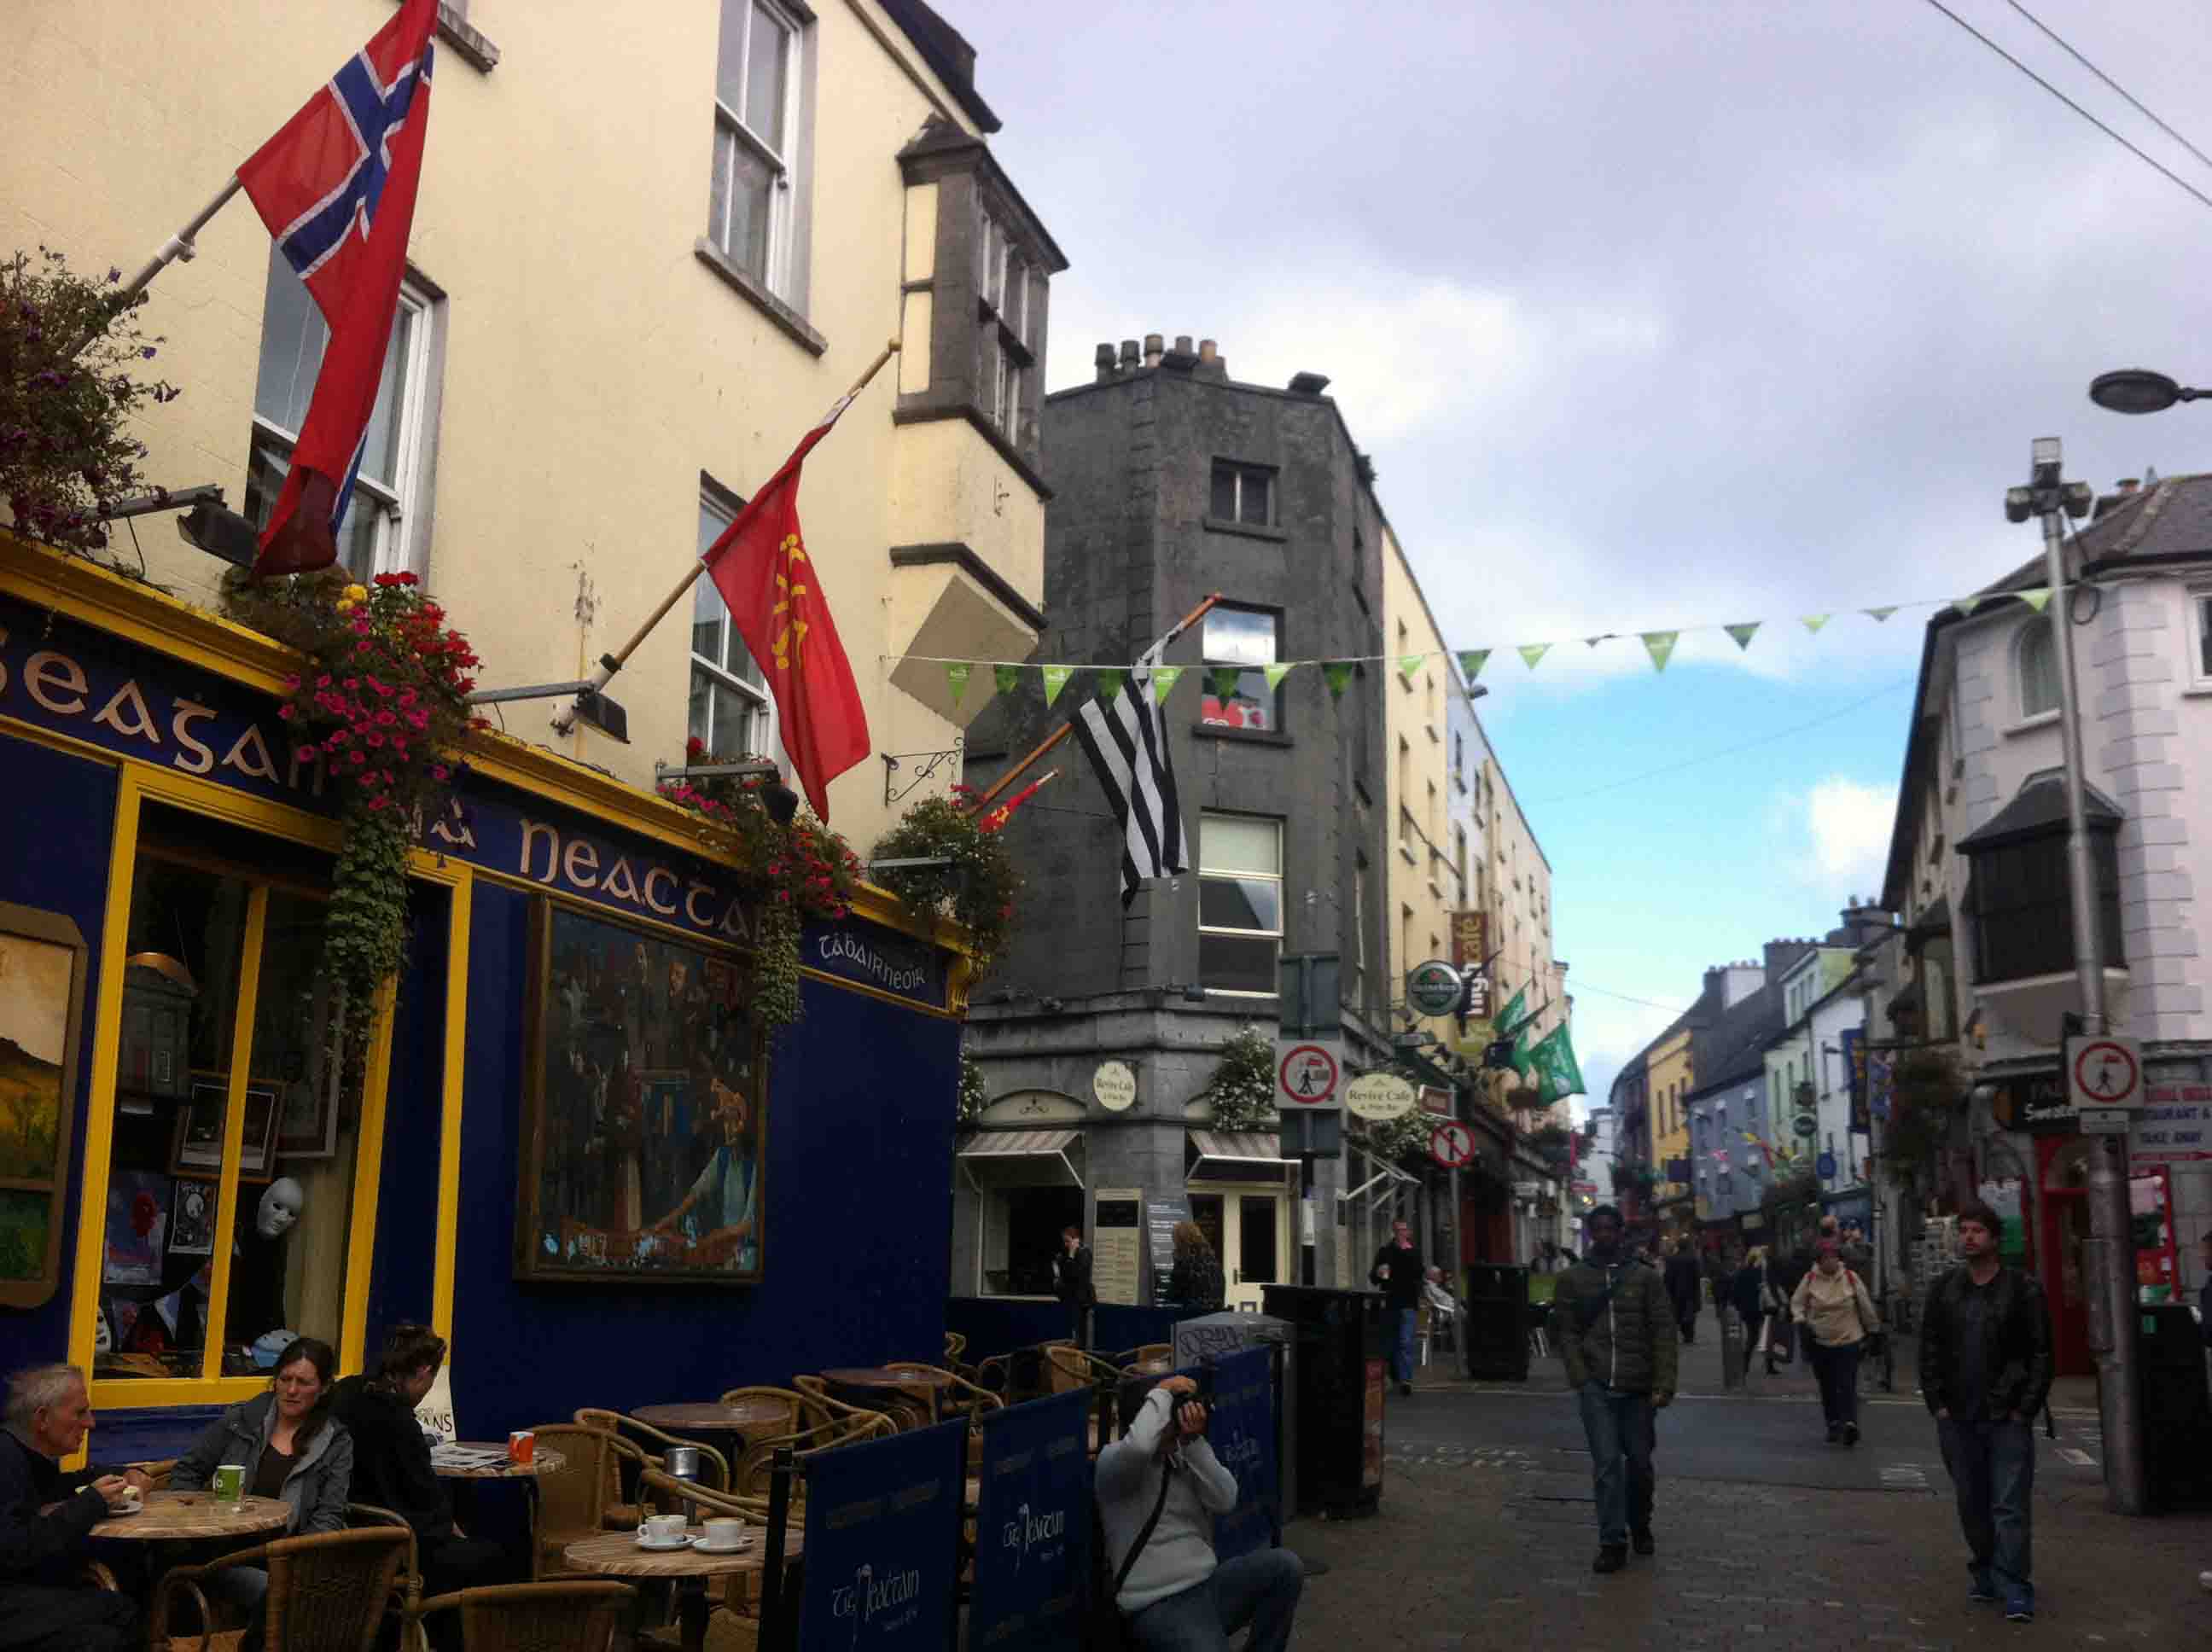 Getting to Know Galway, Ireland in Photos